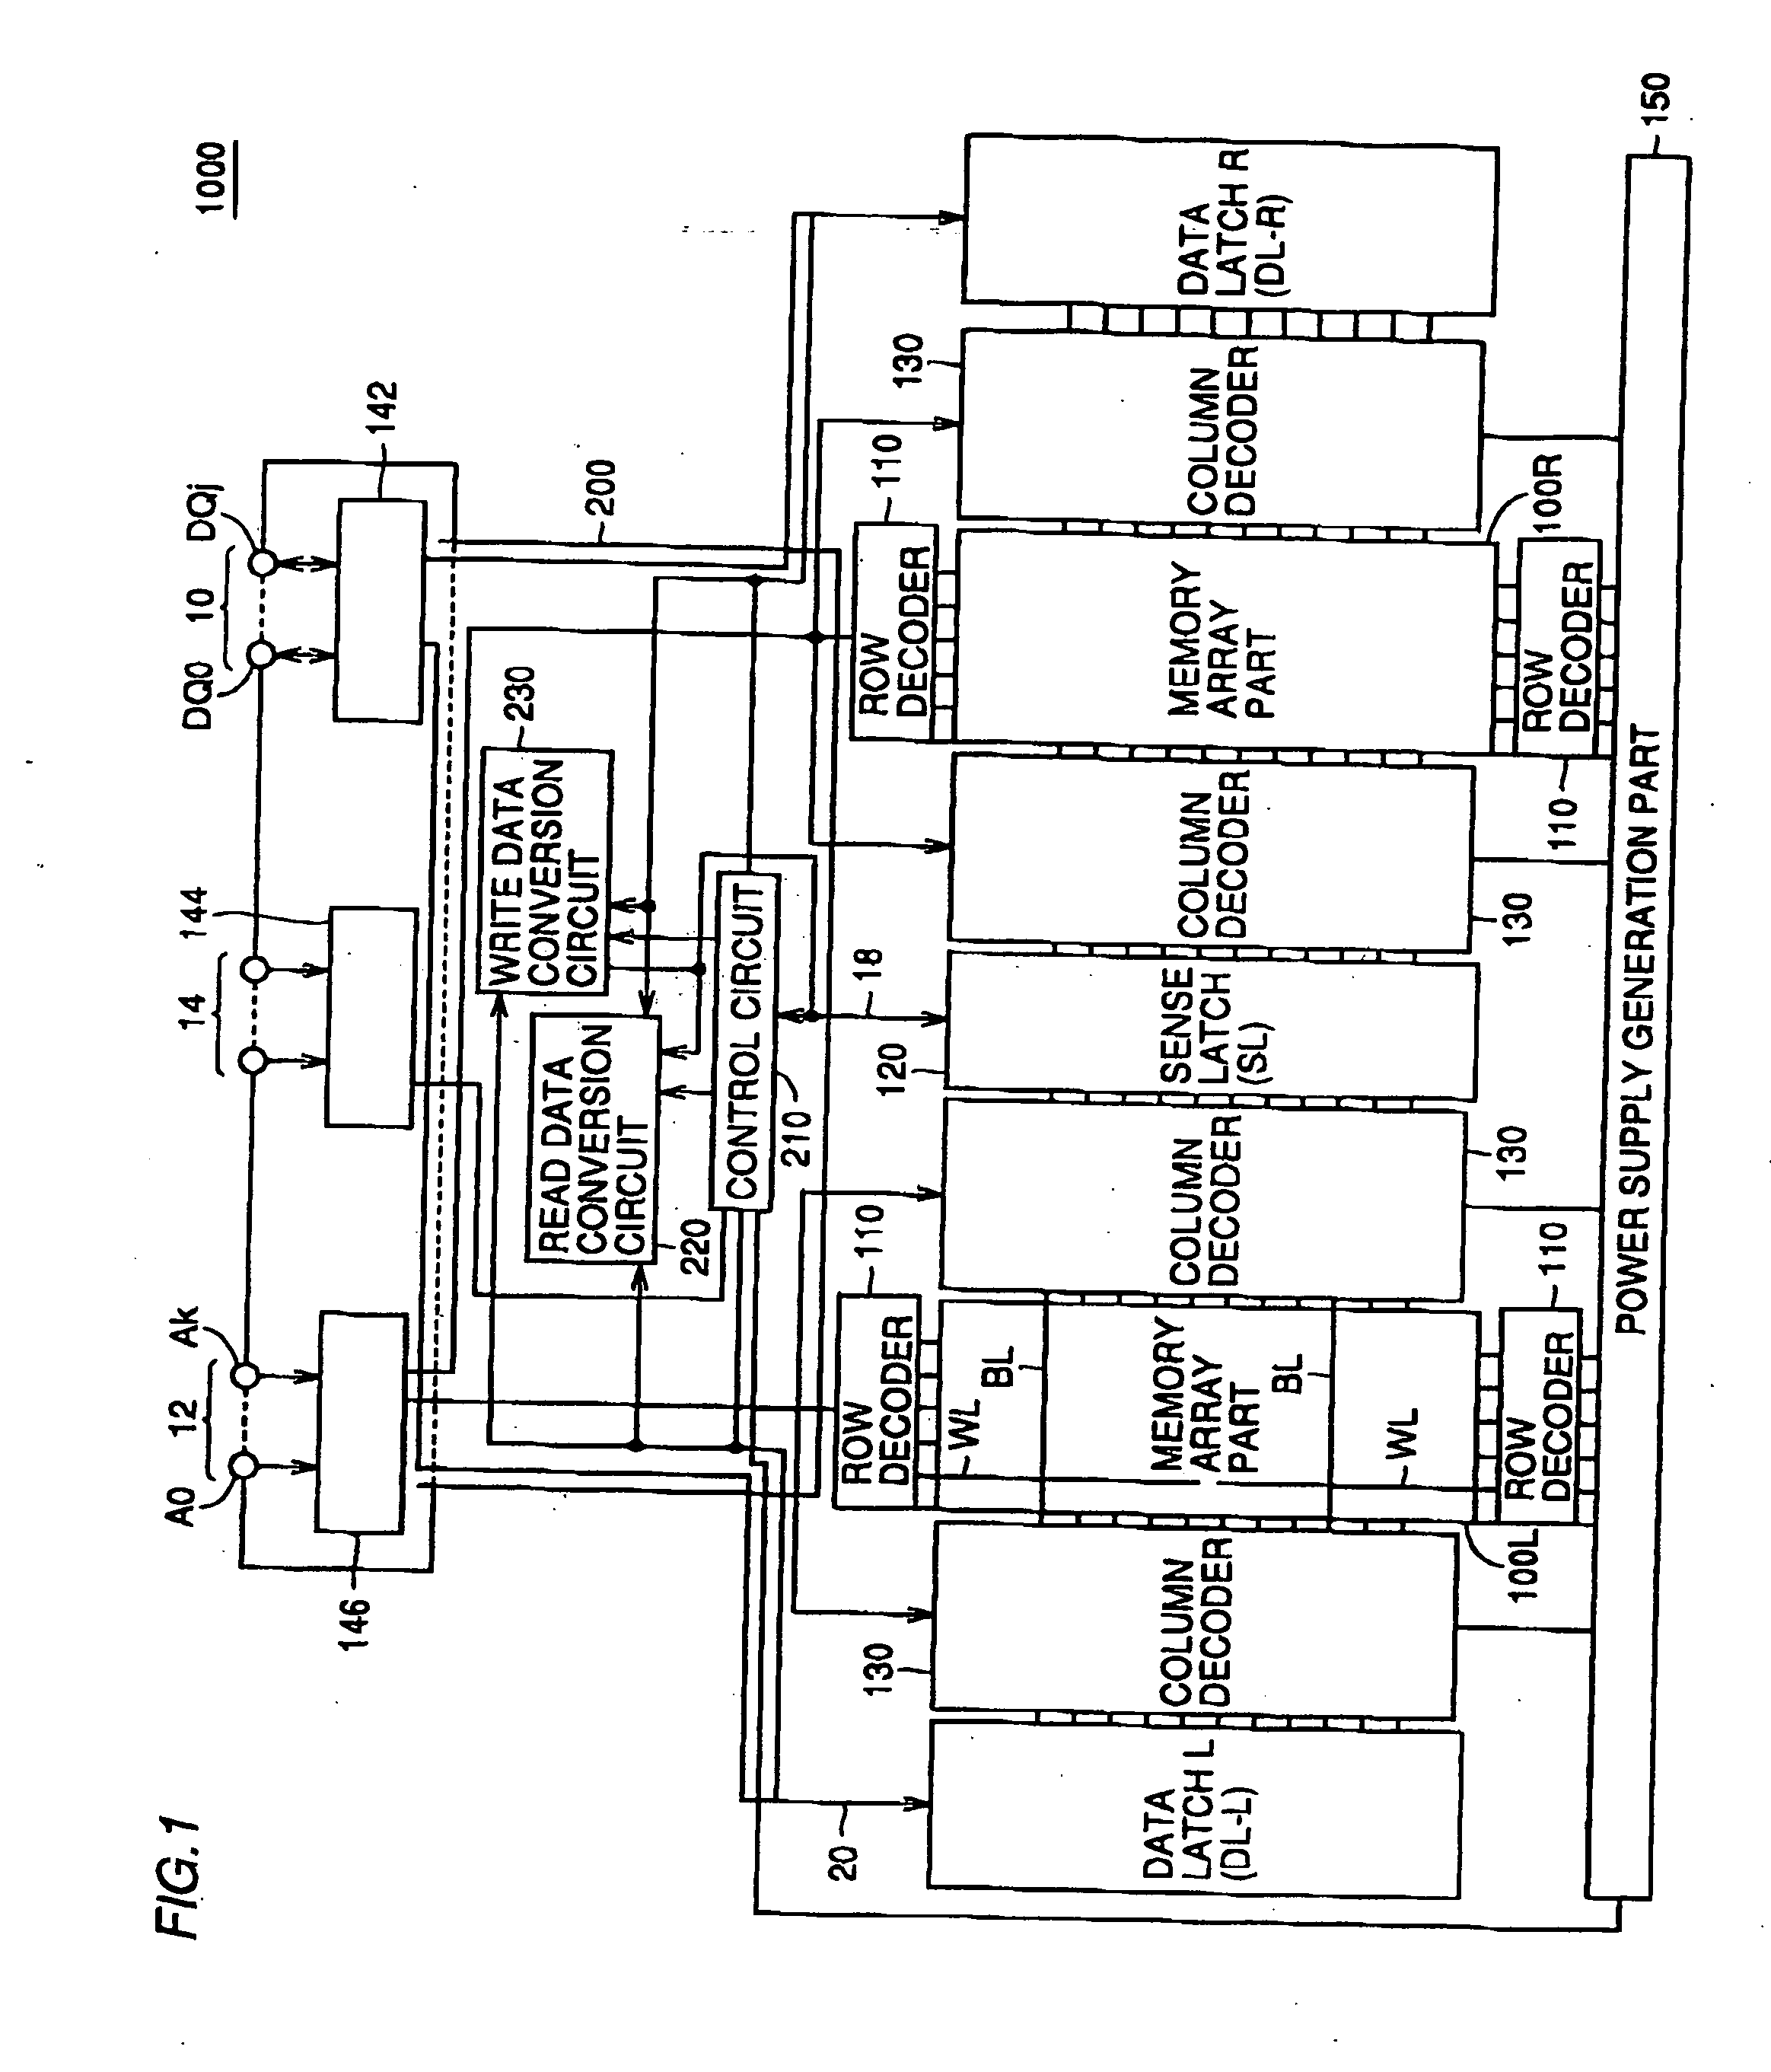 Multilevel storage nonvolatile semiconductor memory device enabling high-speed data reading and high-speed data writing